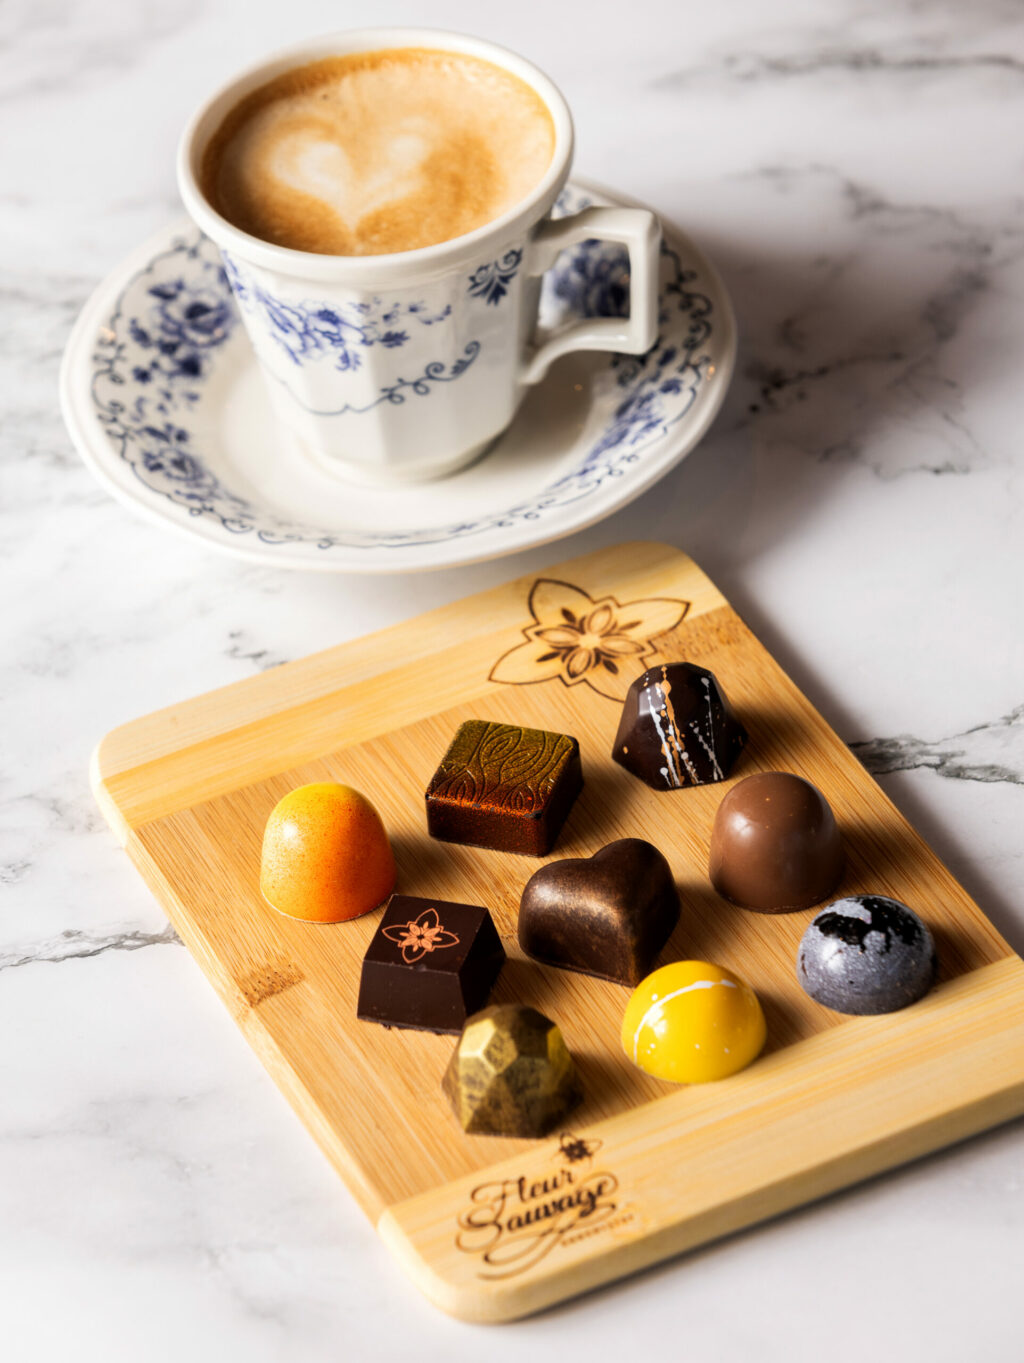 Assorted bonbons from pastry chef Robert Nieto, owner of Fleur Sauvage Chocolates in Windsor, Wednesday, Sept. 18, 2023. (John Burgess / The Press Democrat)